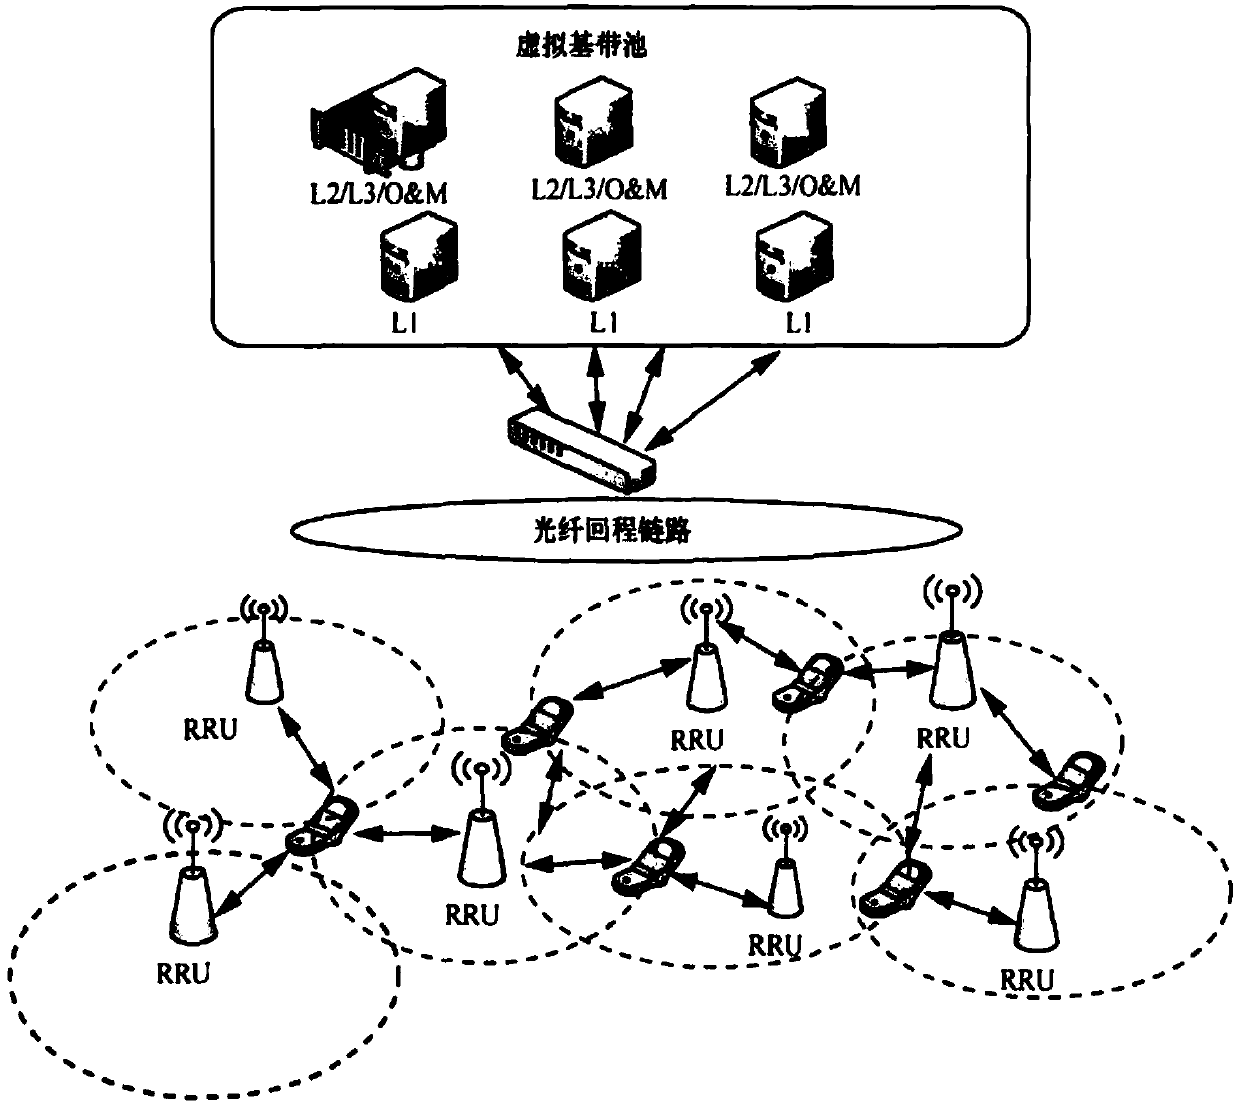 A hybrid access selection method for macro-femto network based on cloud computing